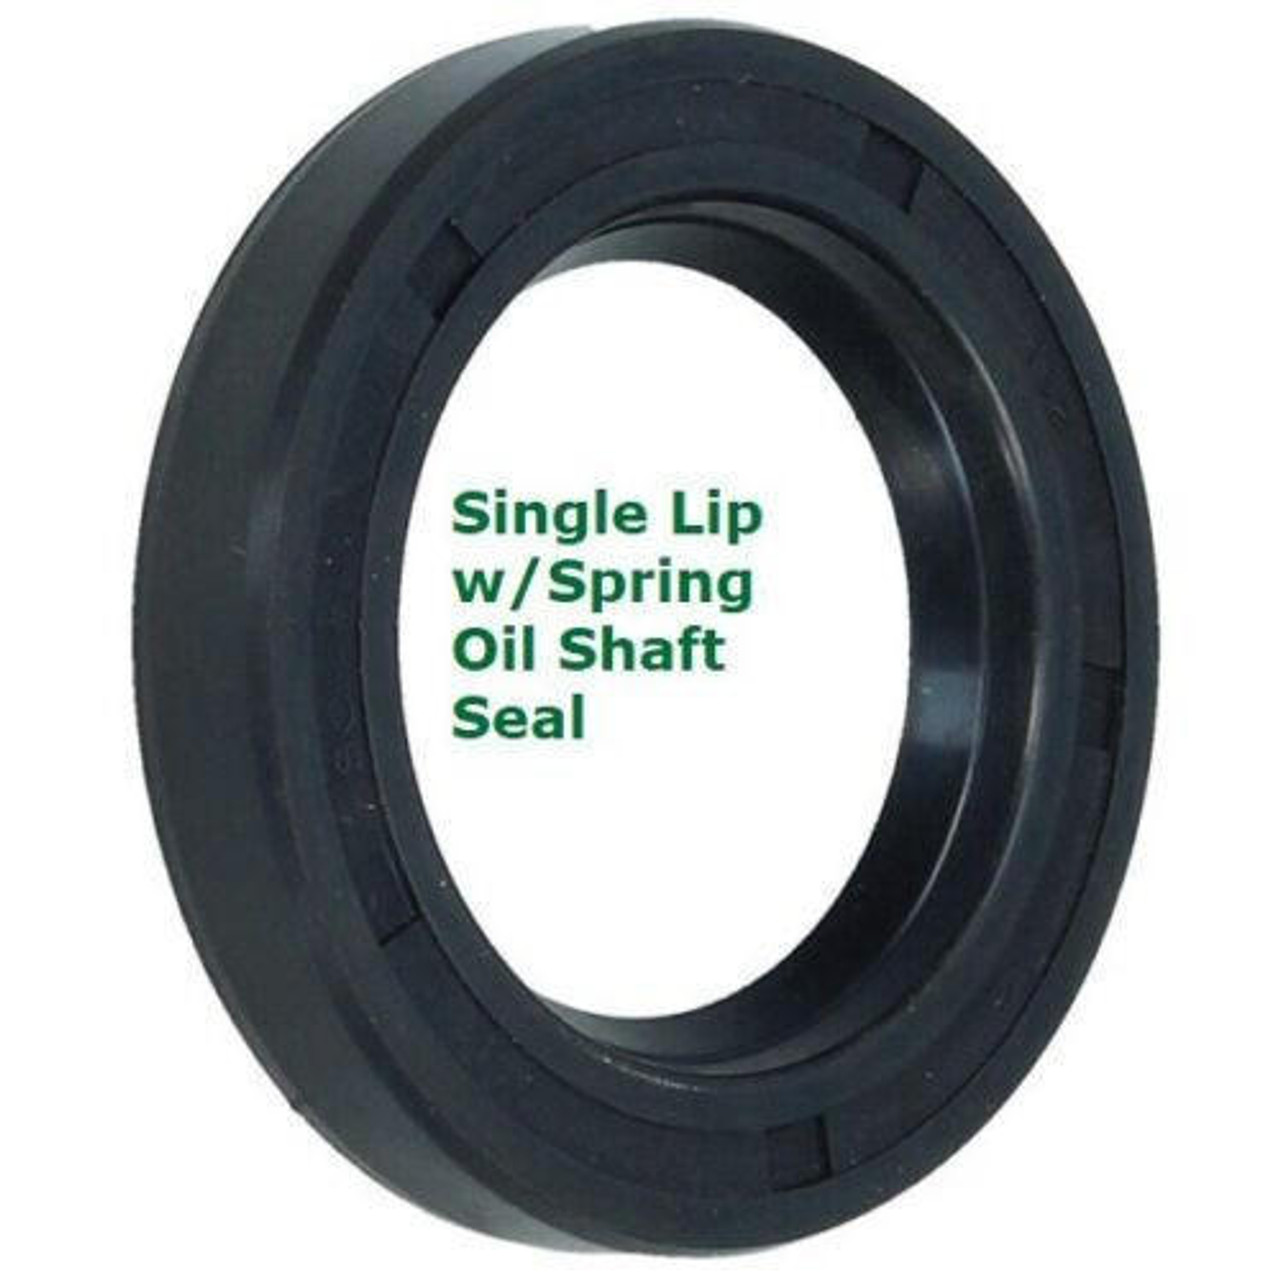 Metric Oil Shaft Seal 105 x 135 x 13mm   Price for 1 pc